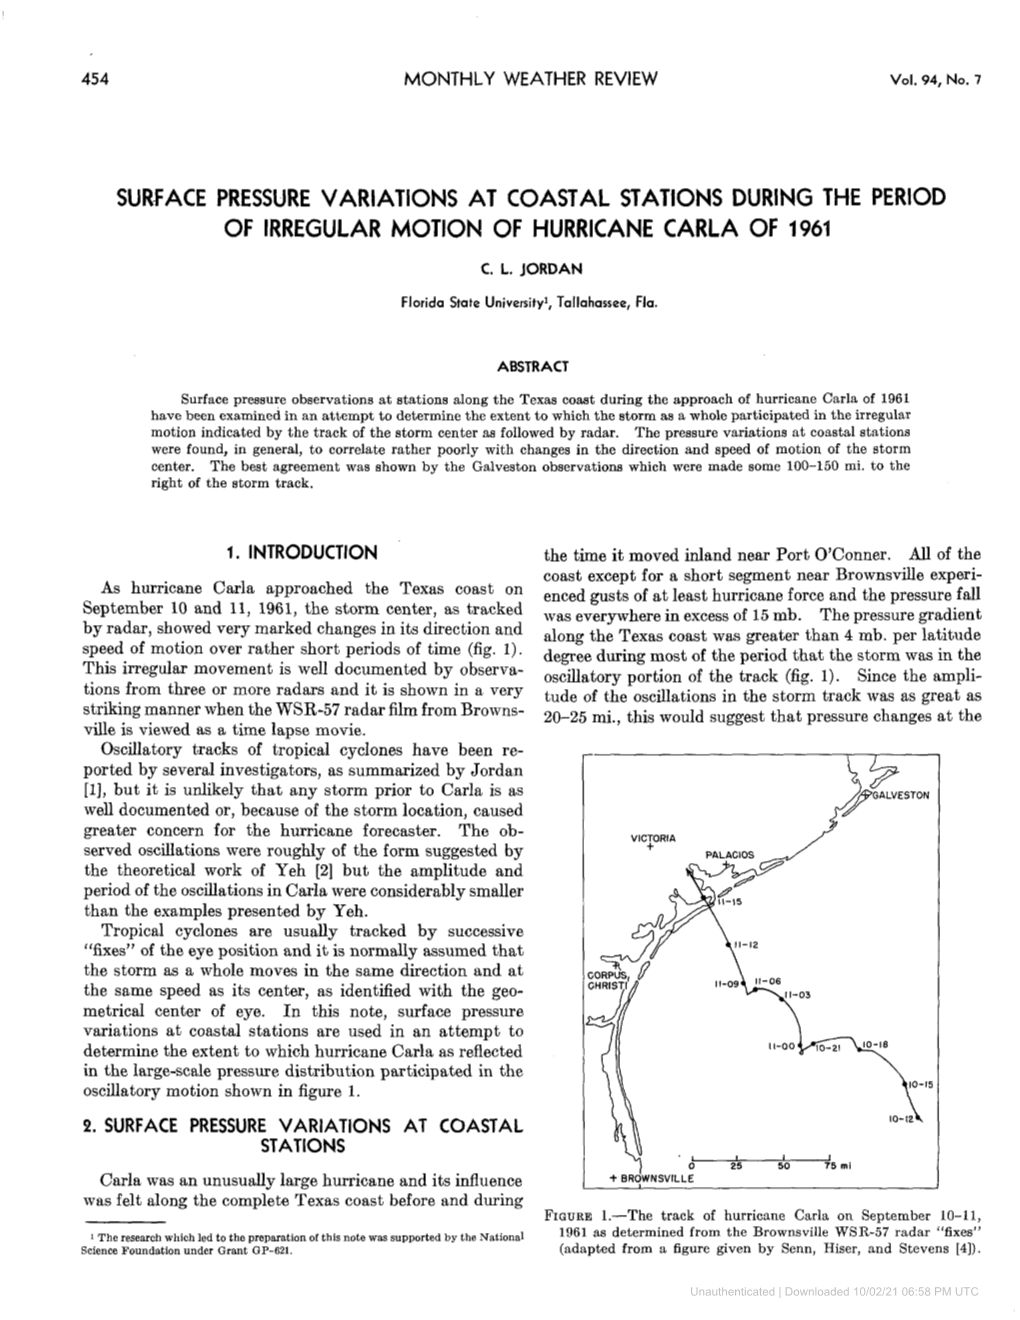 Surface Pressure Variations at Coastal Stations During the Period of Irregular Motion of Hurricane Carla of 1961